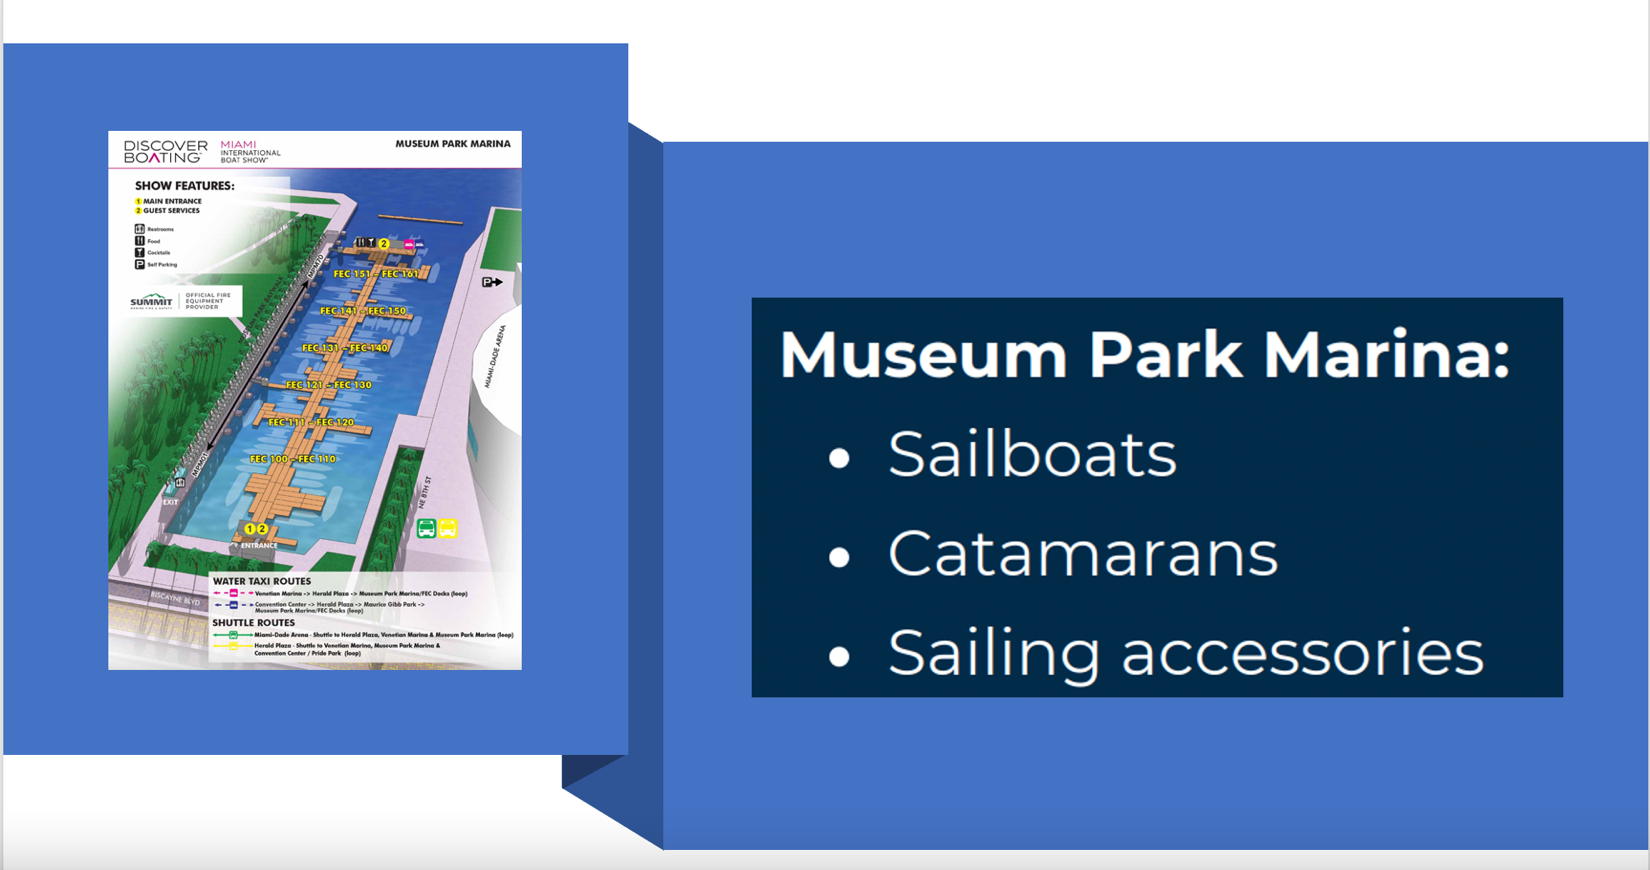 Guide to MIBS, Museum Park Marina